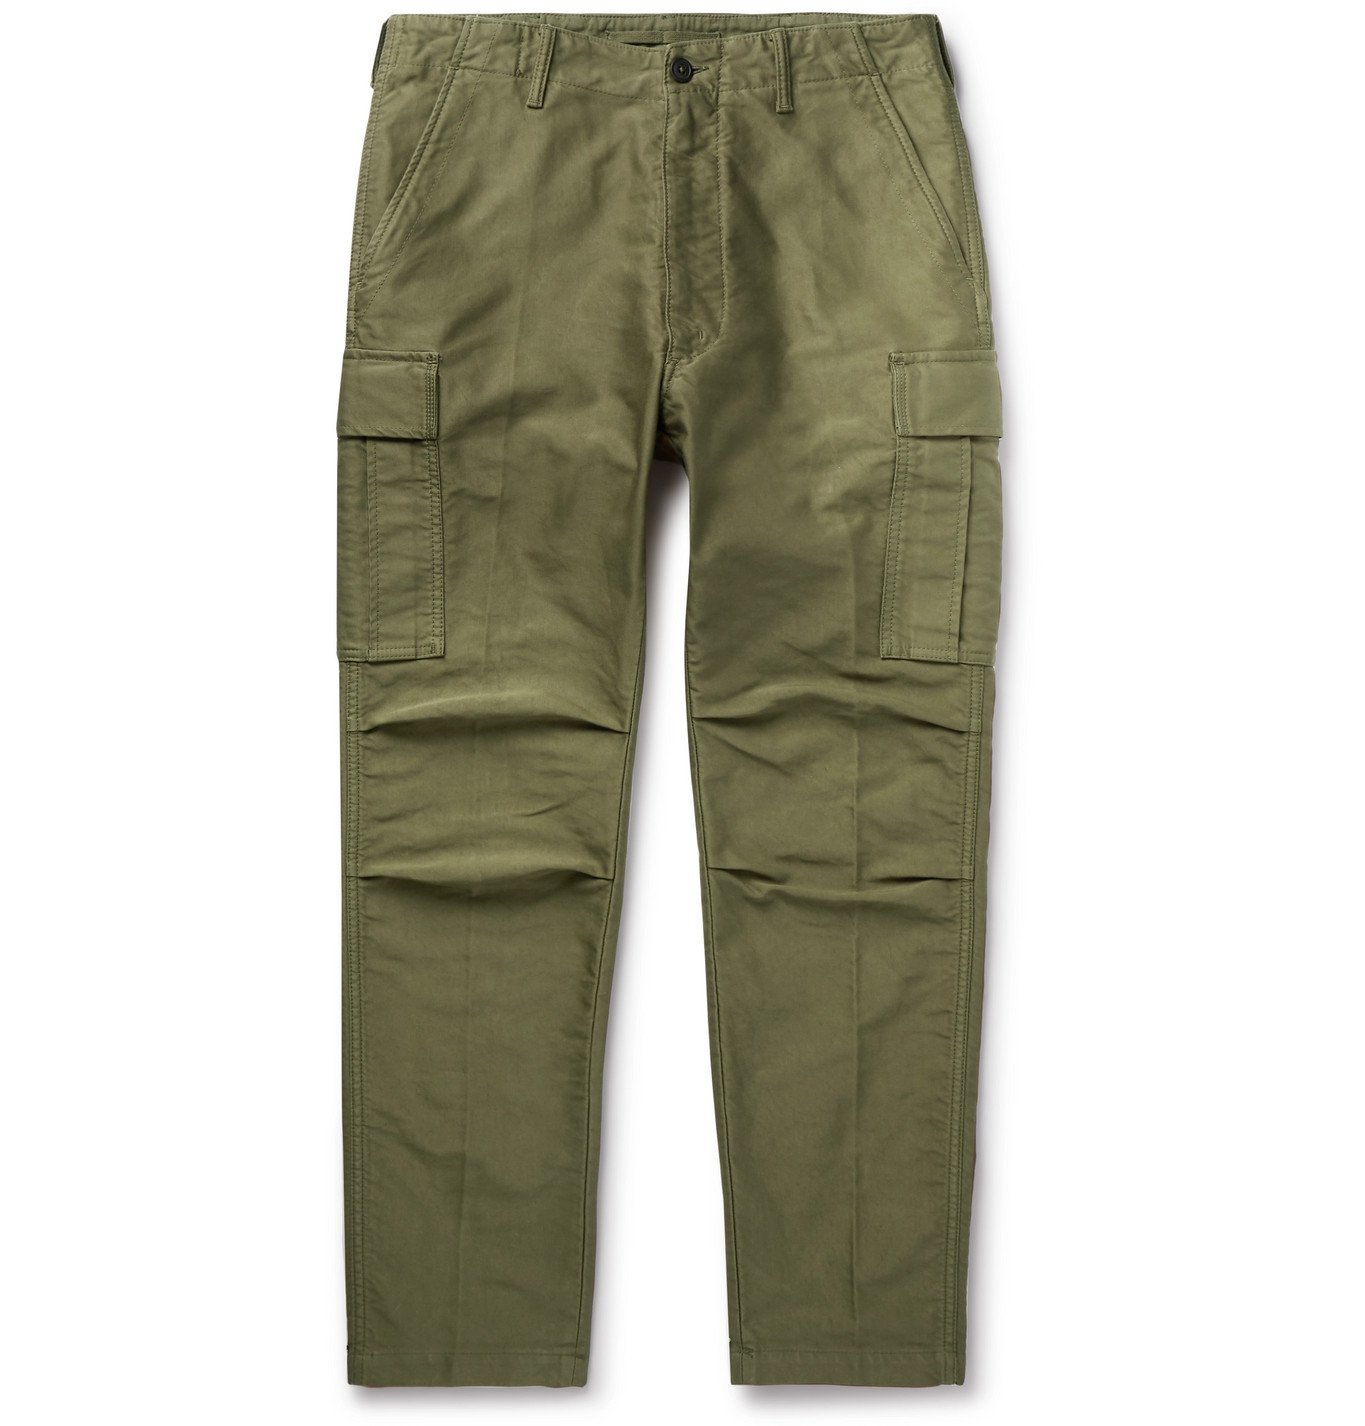 TOM FORD - Slim-Fit Cotton Cargo Trousers - Green TOM FORD